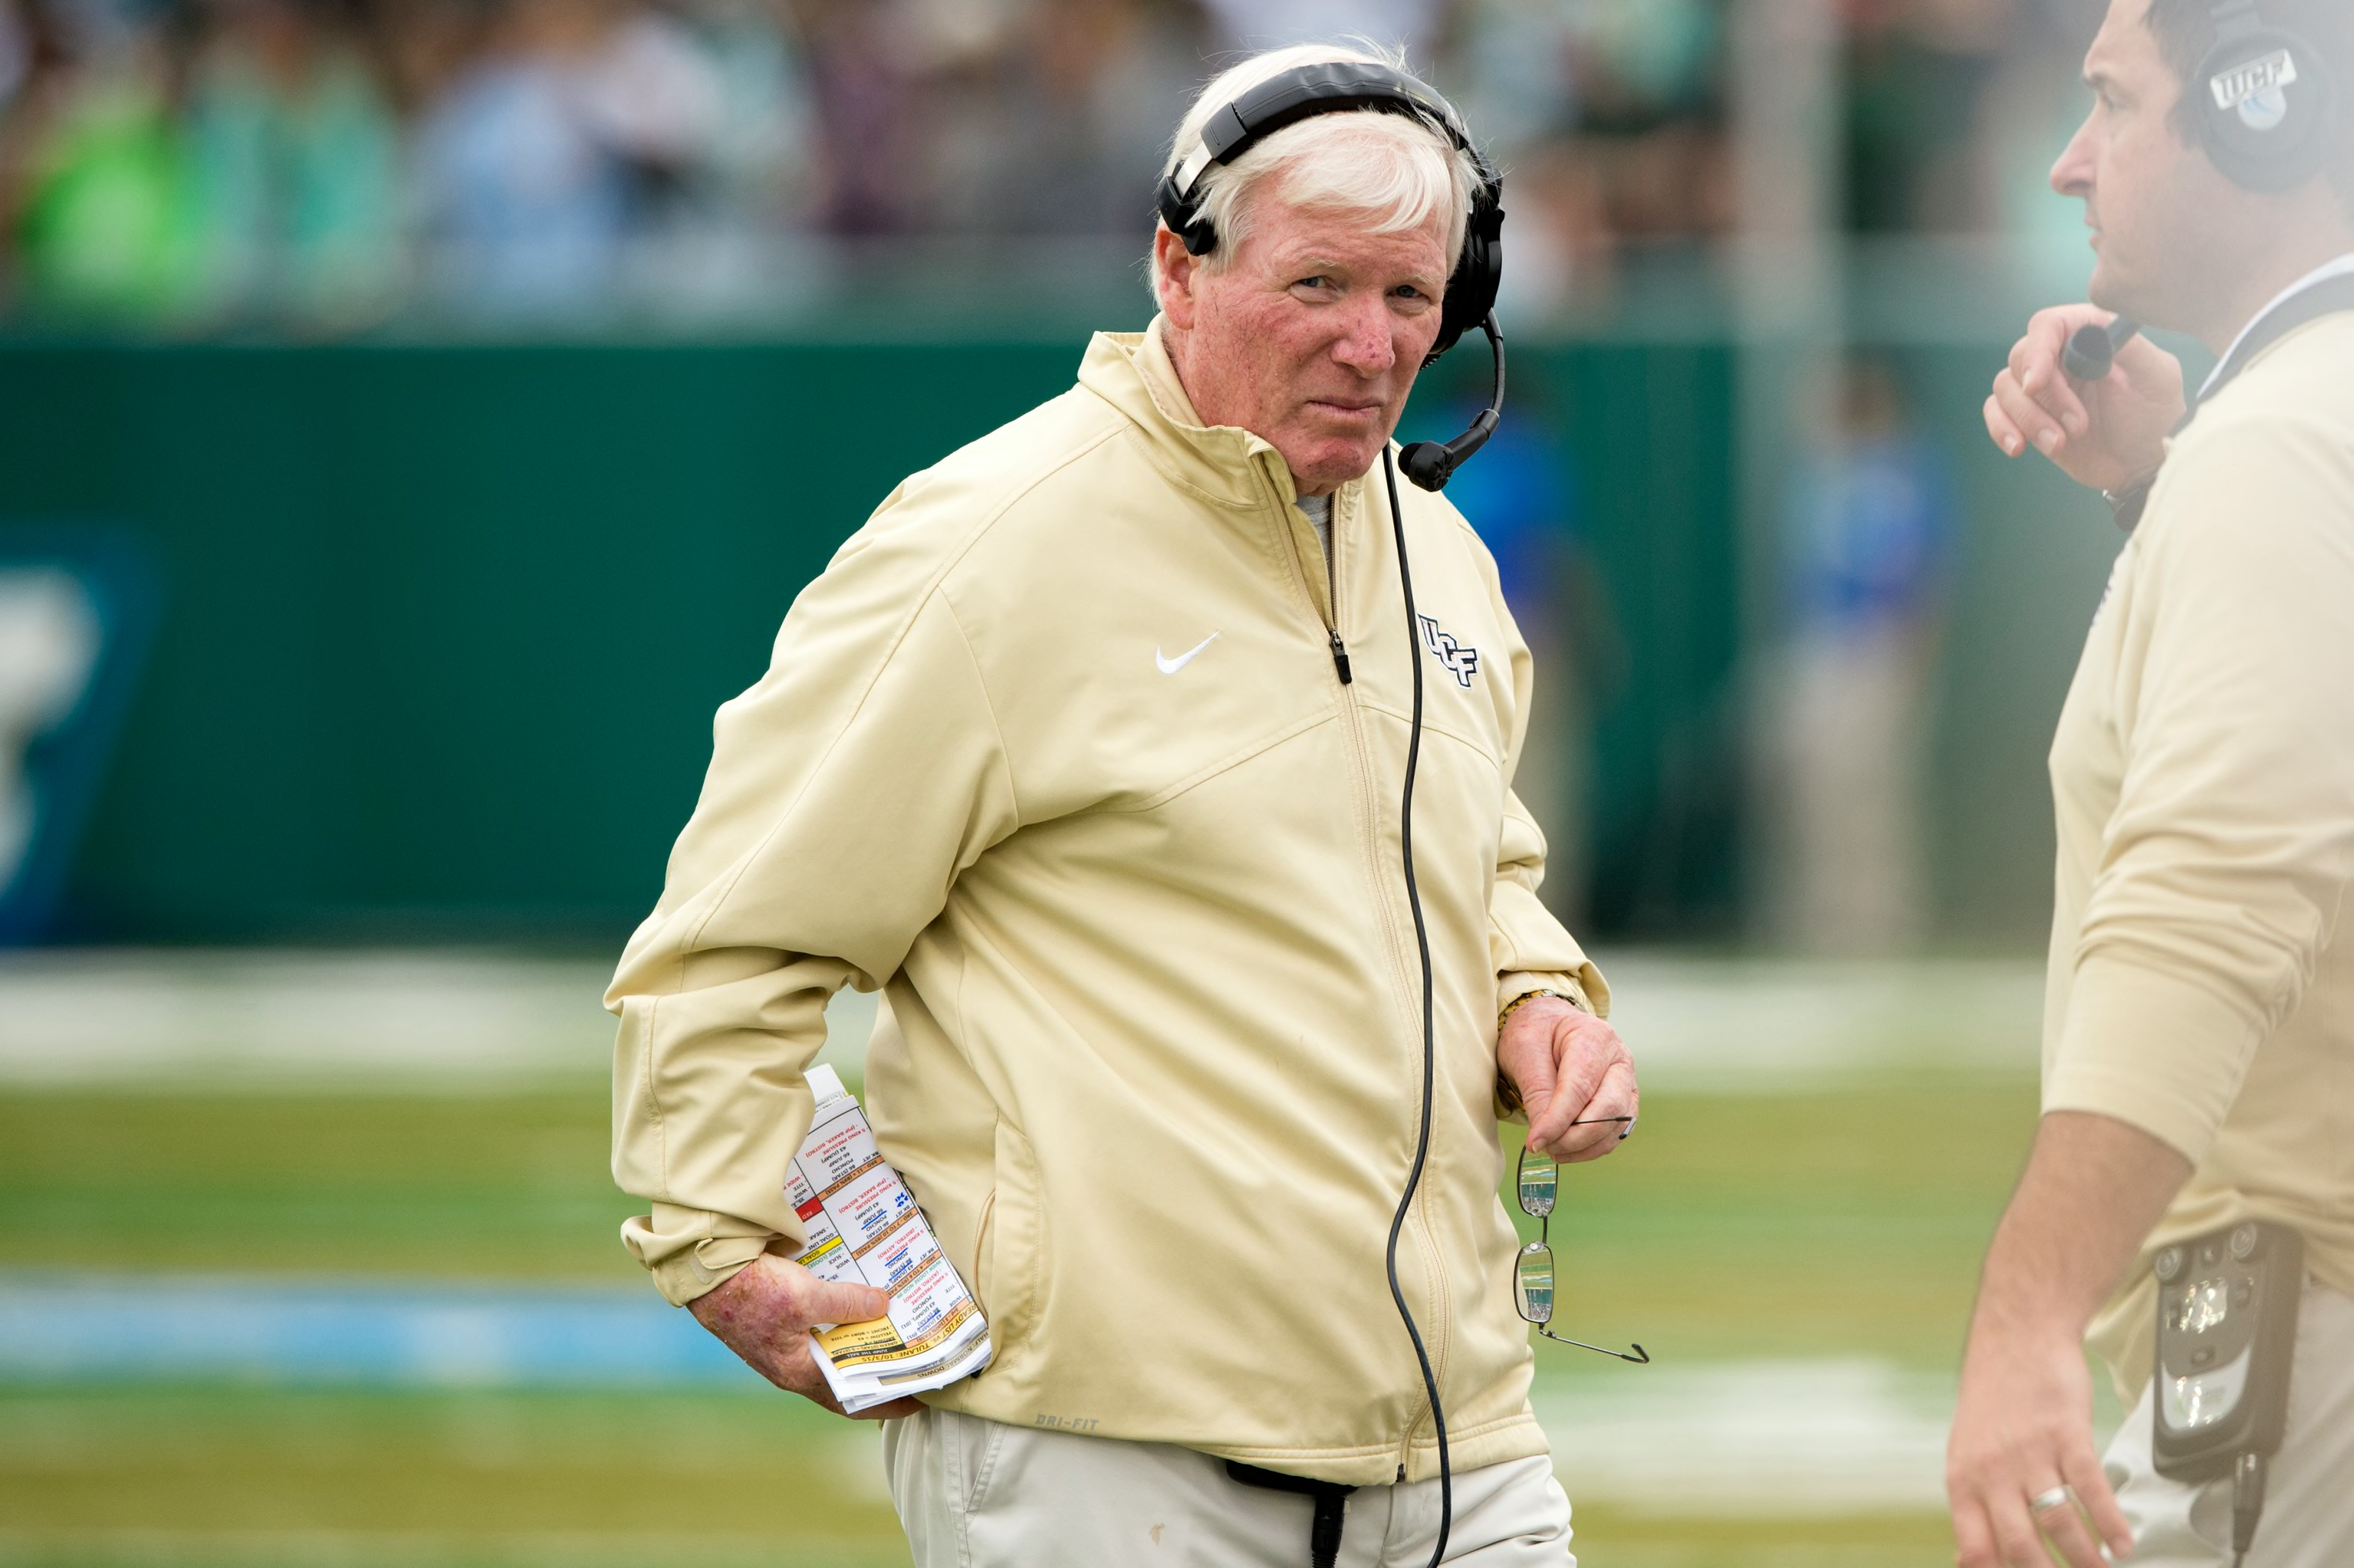 Notre Dame football: The complicated legacy of George O'Leary